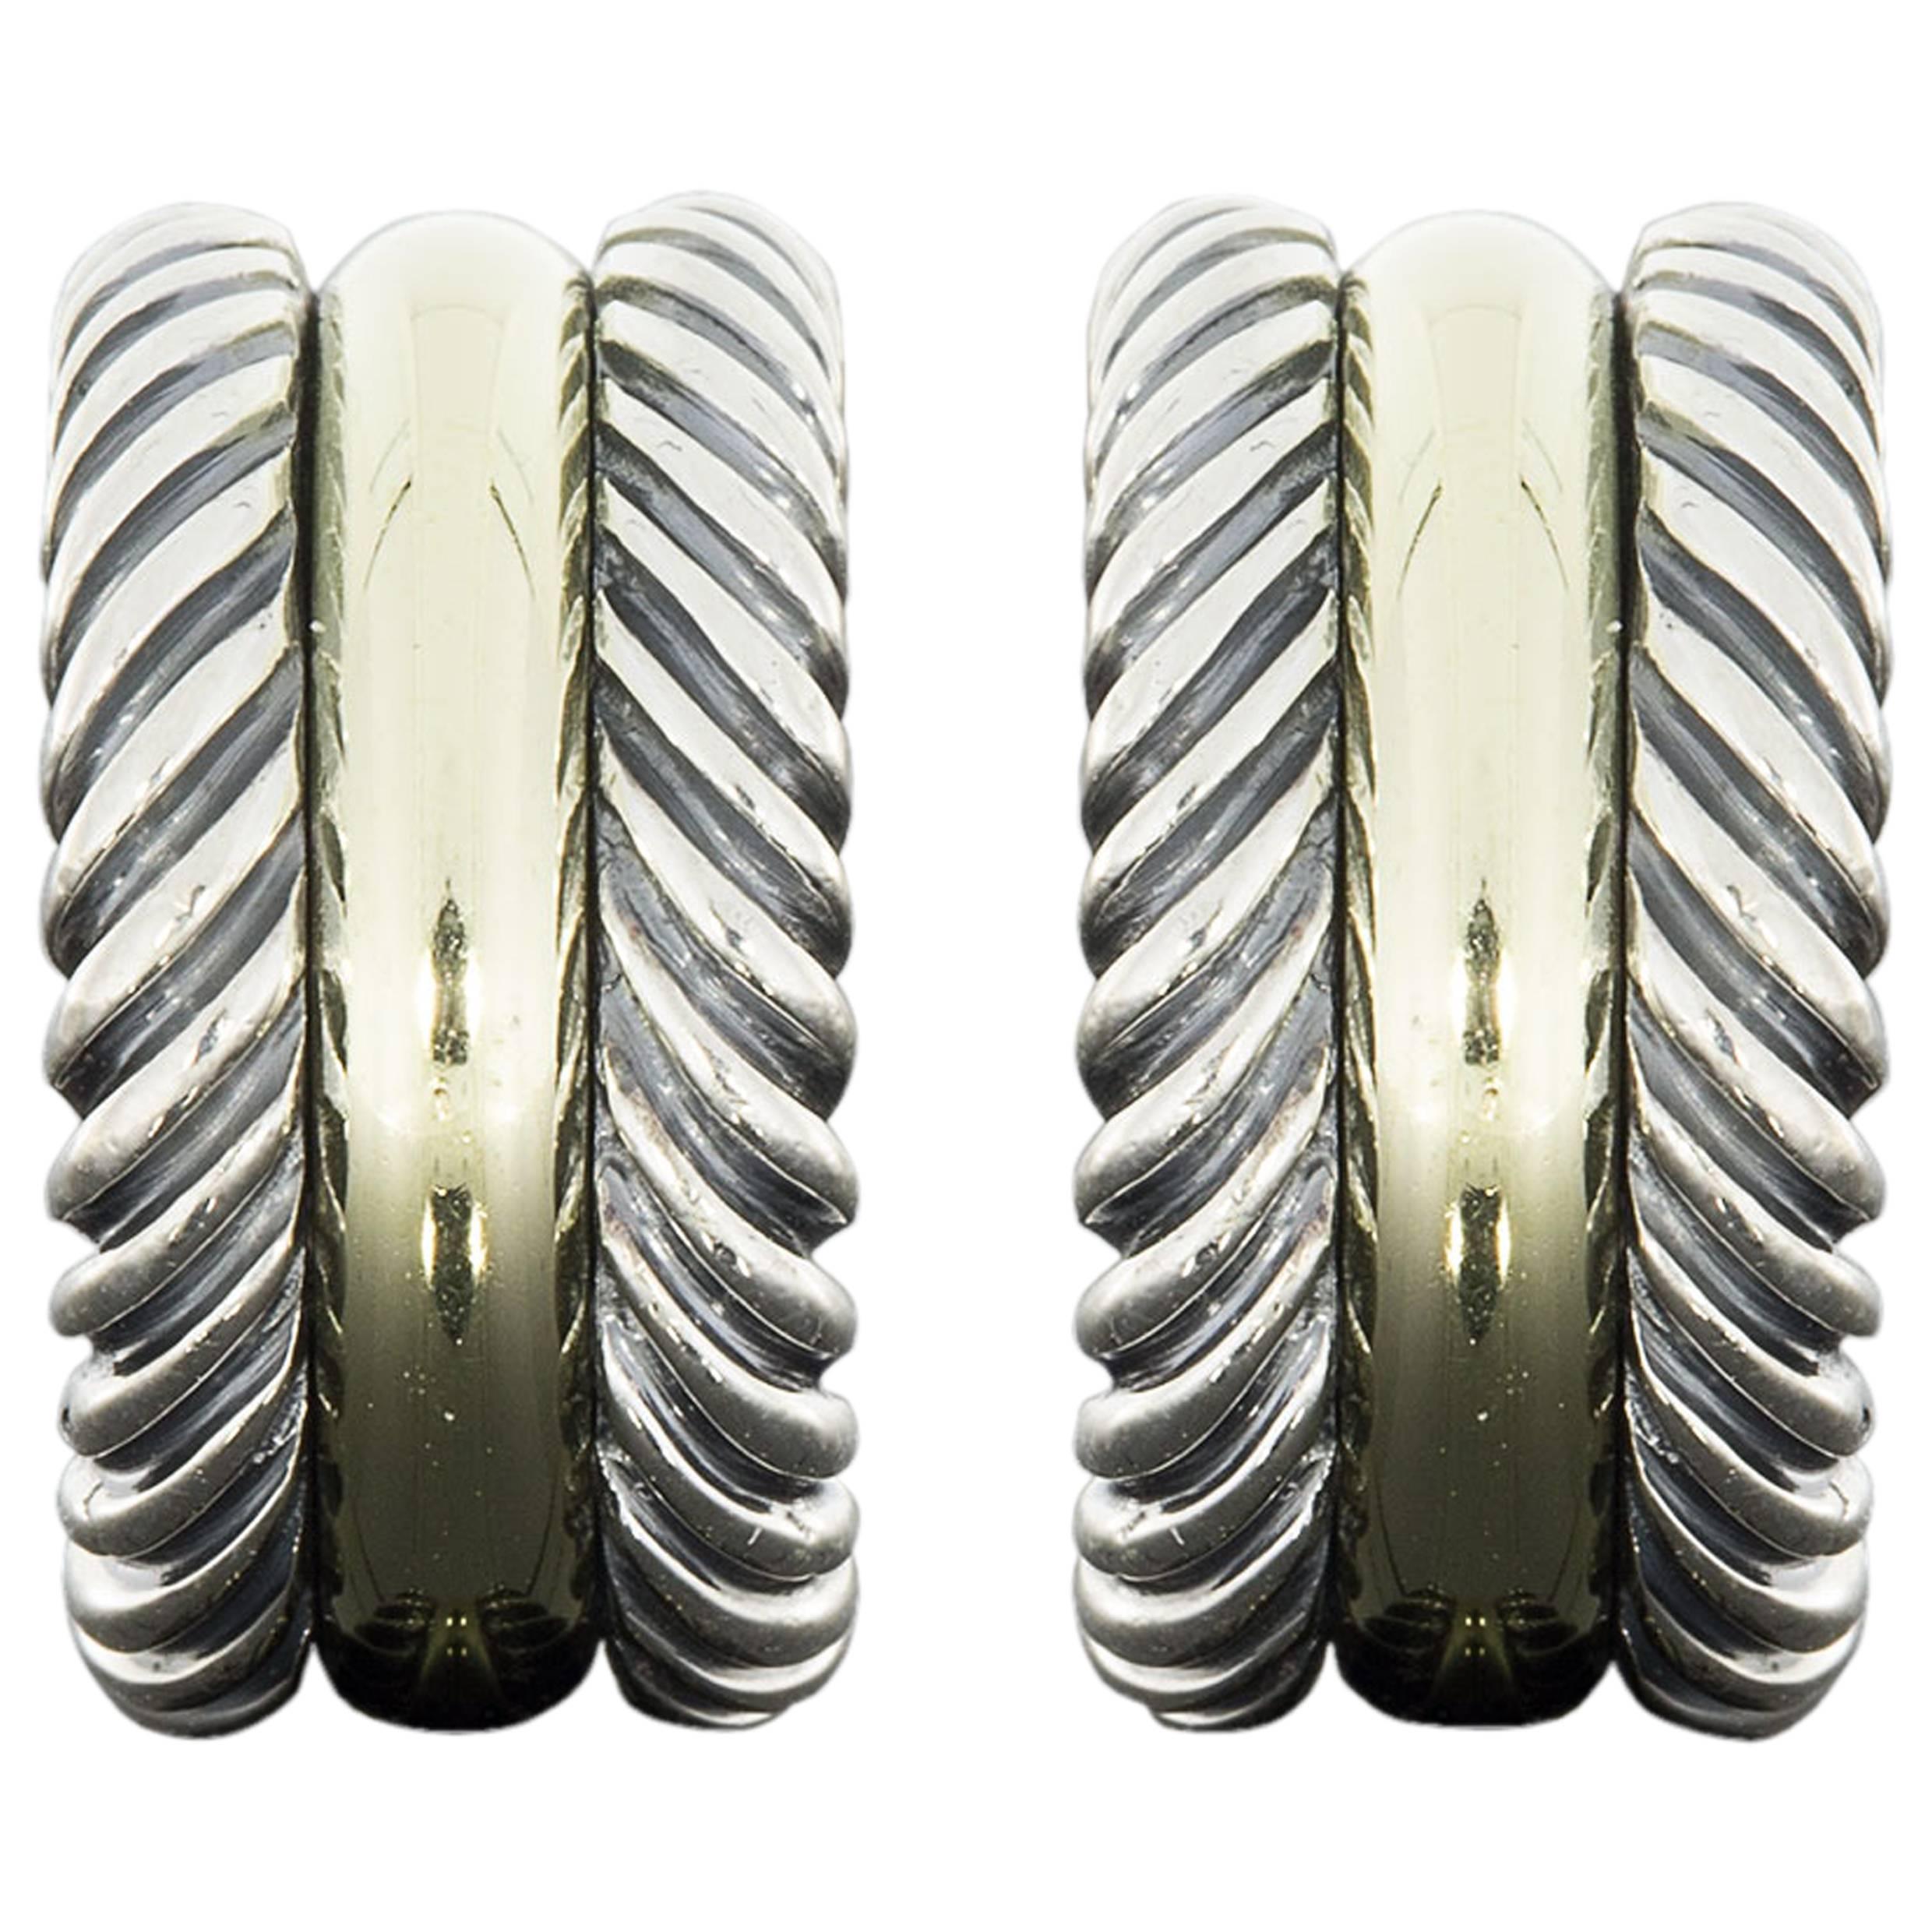 David Yurman's cable style jewelry has become his signature, the unifying element of every collection. These beautiful Cable Classics Collection earrings have 2 rows of sterling silver cable framing a center row of 14 karat yellow gold. They are